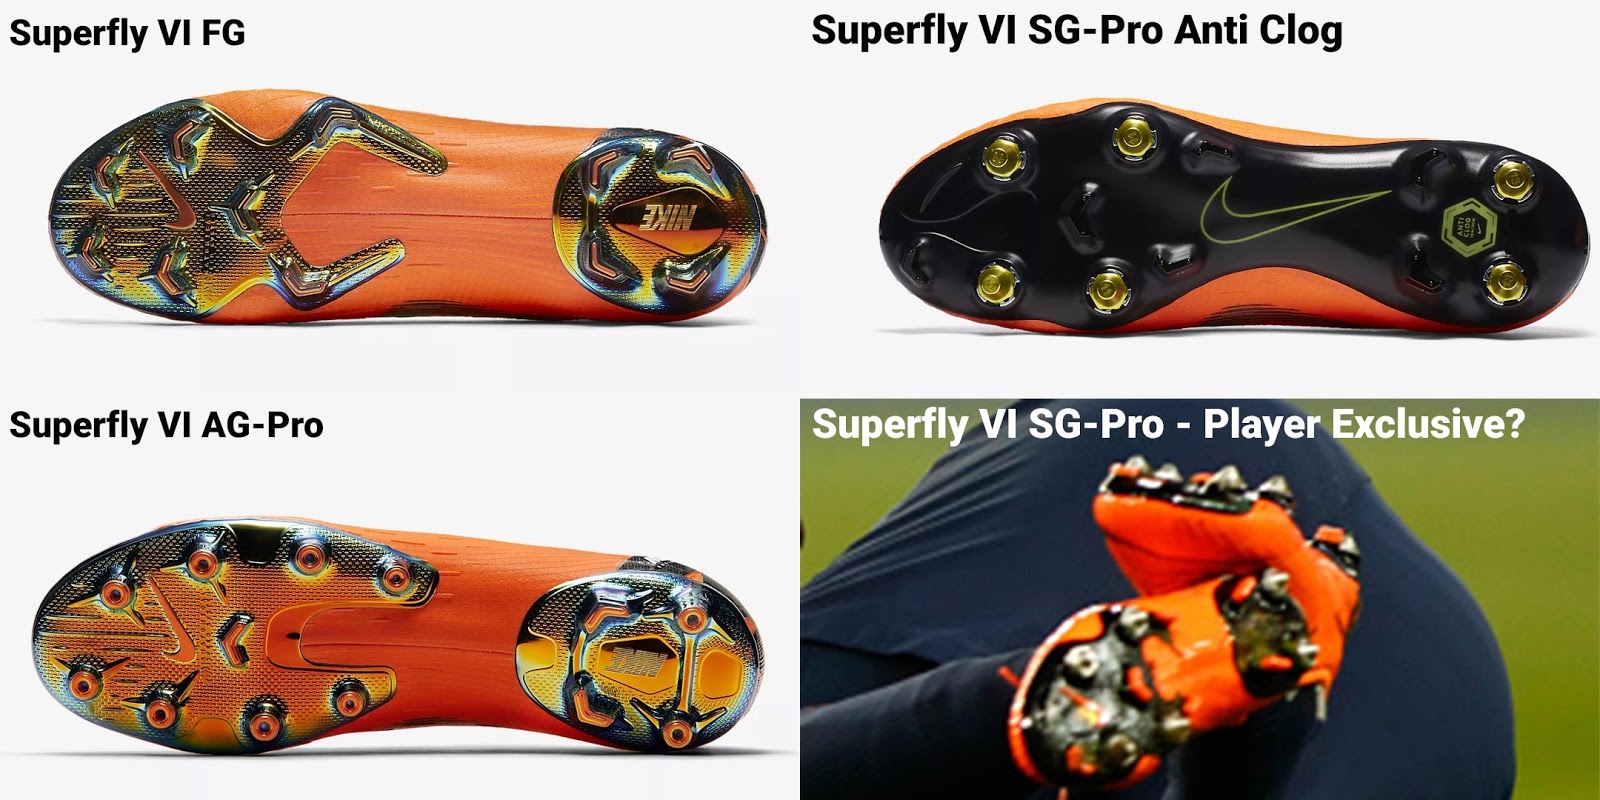 SG Version Without Anti-Clog Sole Only For CR7, Neymar Co? Nike Mercurial Superfly Vapor 360 2018 Boots - FG vs AG vs SG-Pro Anti-Clog Versions - Footy Headlines